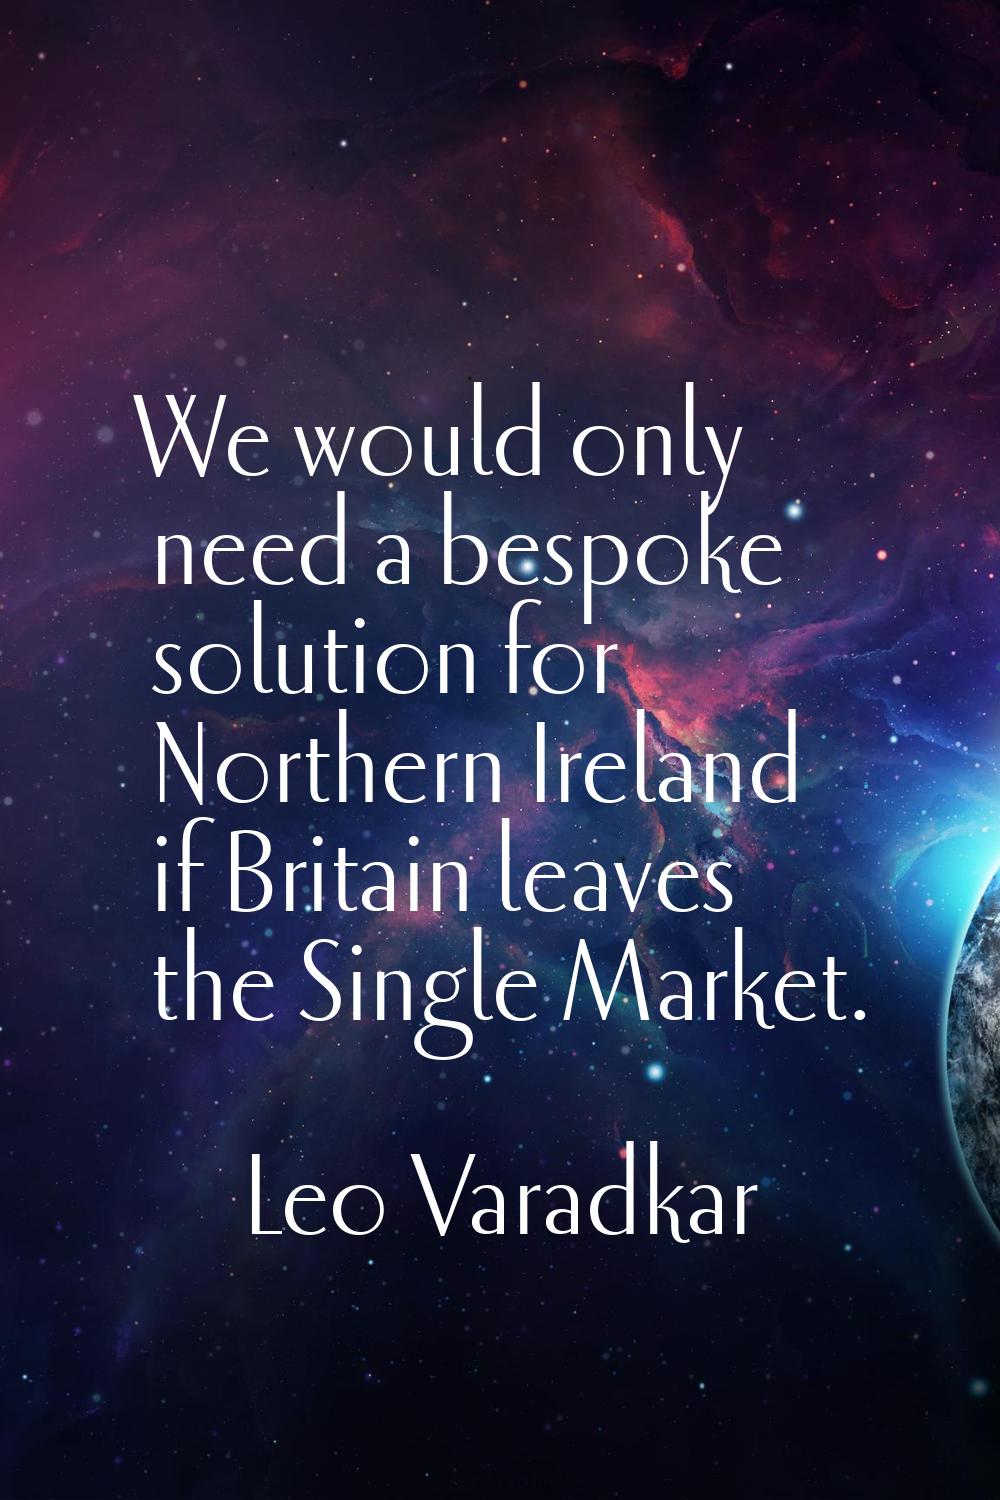 We would only need a bespoke solution for Northern Ireland if Britain leaves the Single Market.